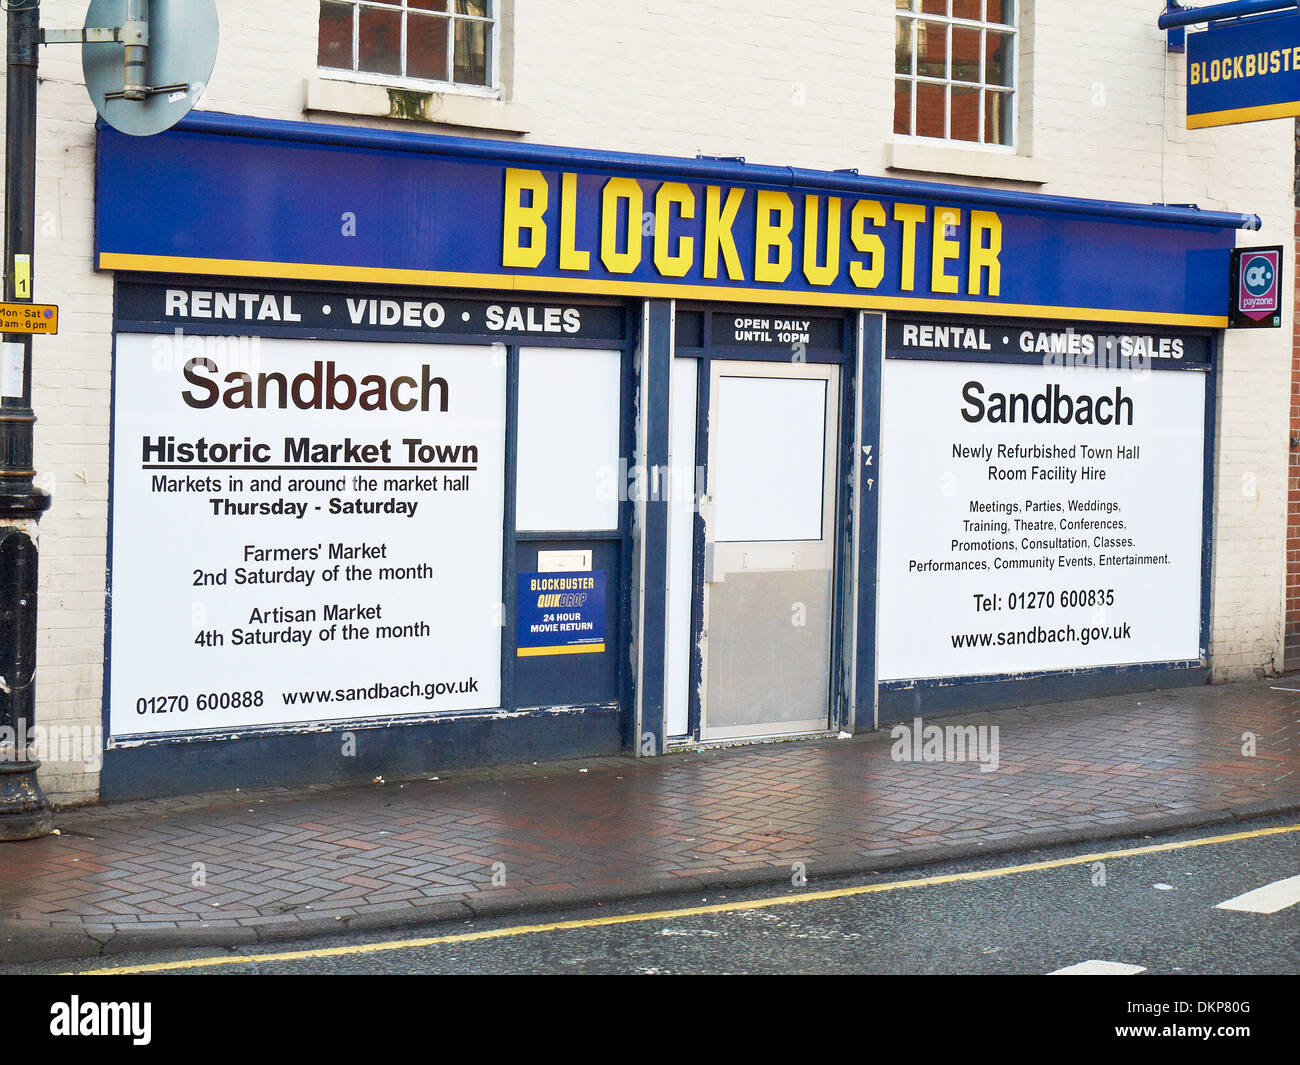 The closed down Blockbuster store in Sandbach, now used to promote Sandbach historic market town, Cheshire UK Stock Photo